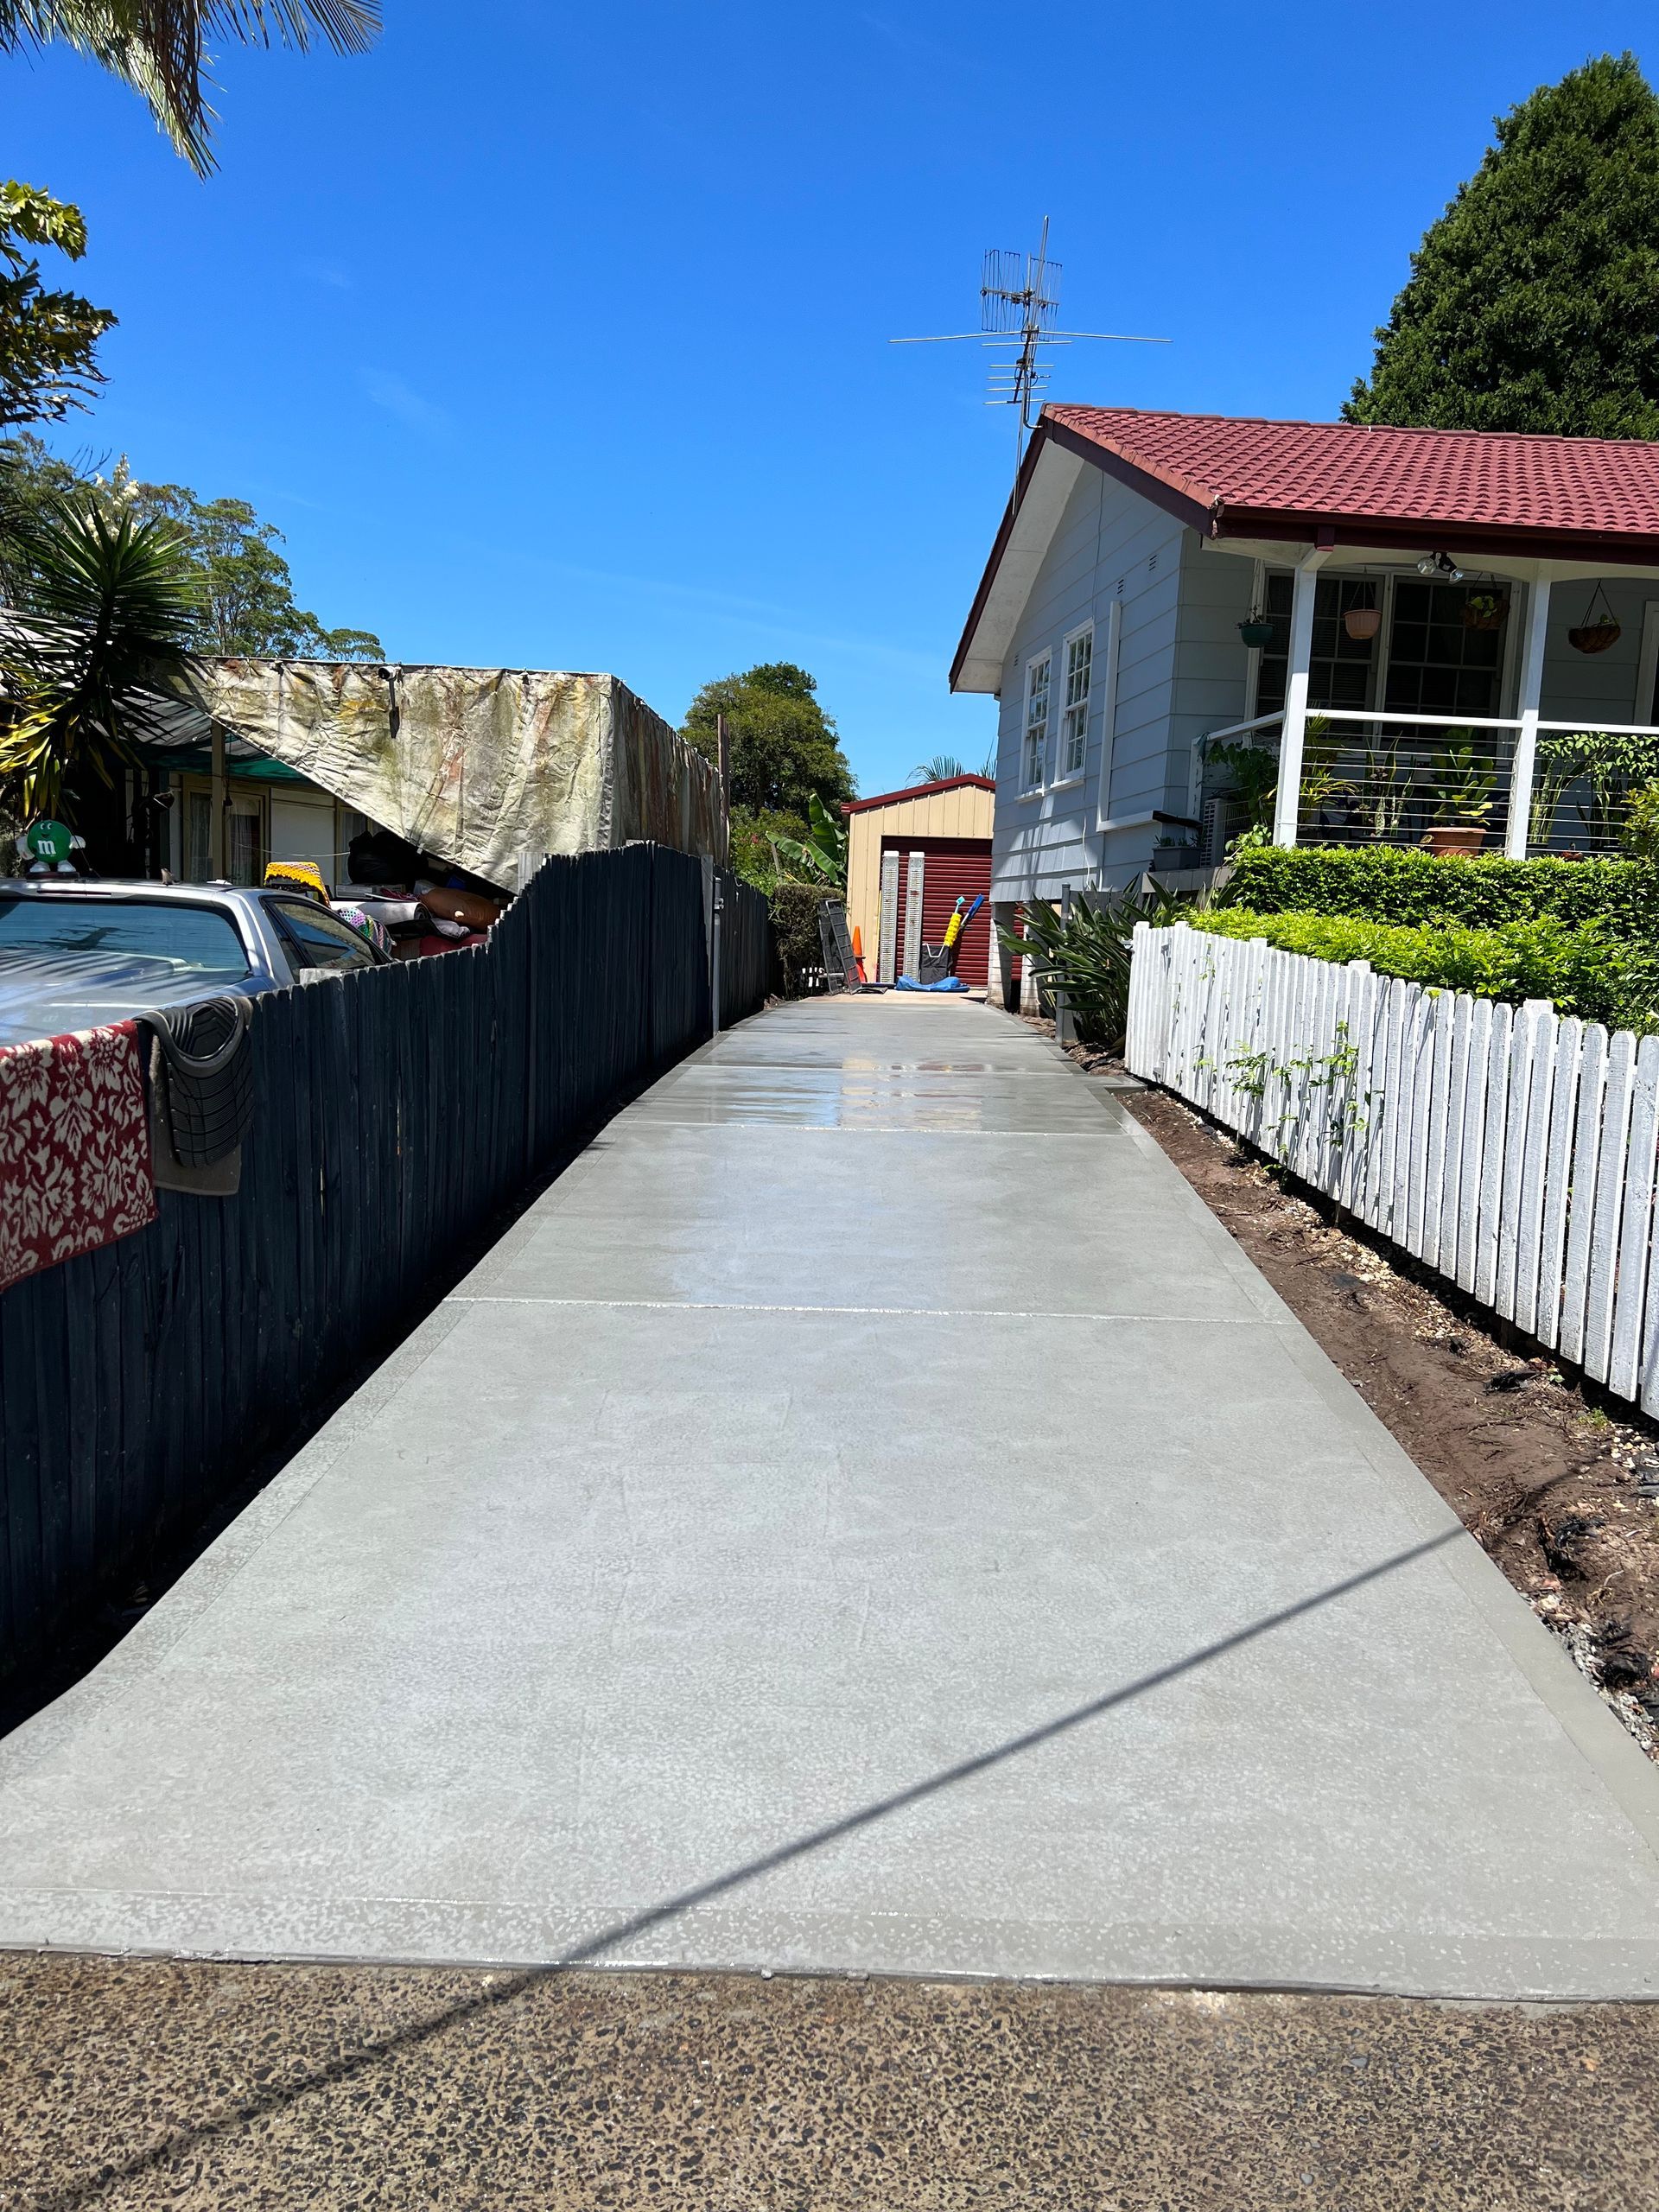 Concrete Block Wall and Pavement Sidewalk Street Floor — Contact Our Concreters in Morisset, NSW